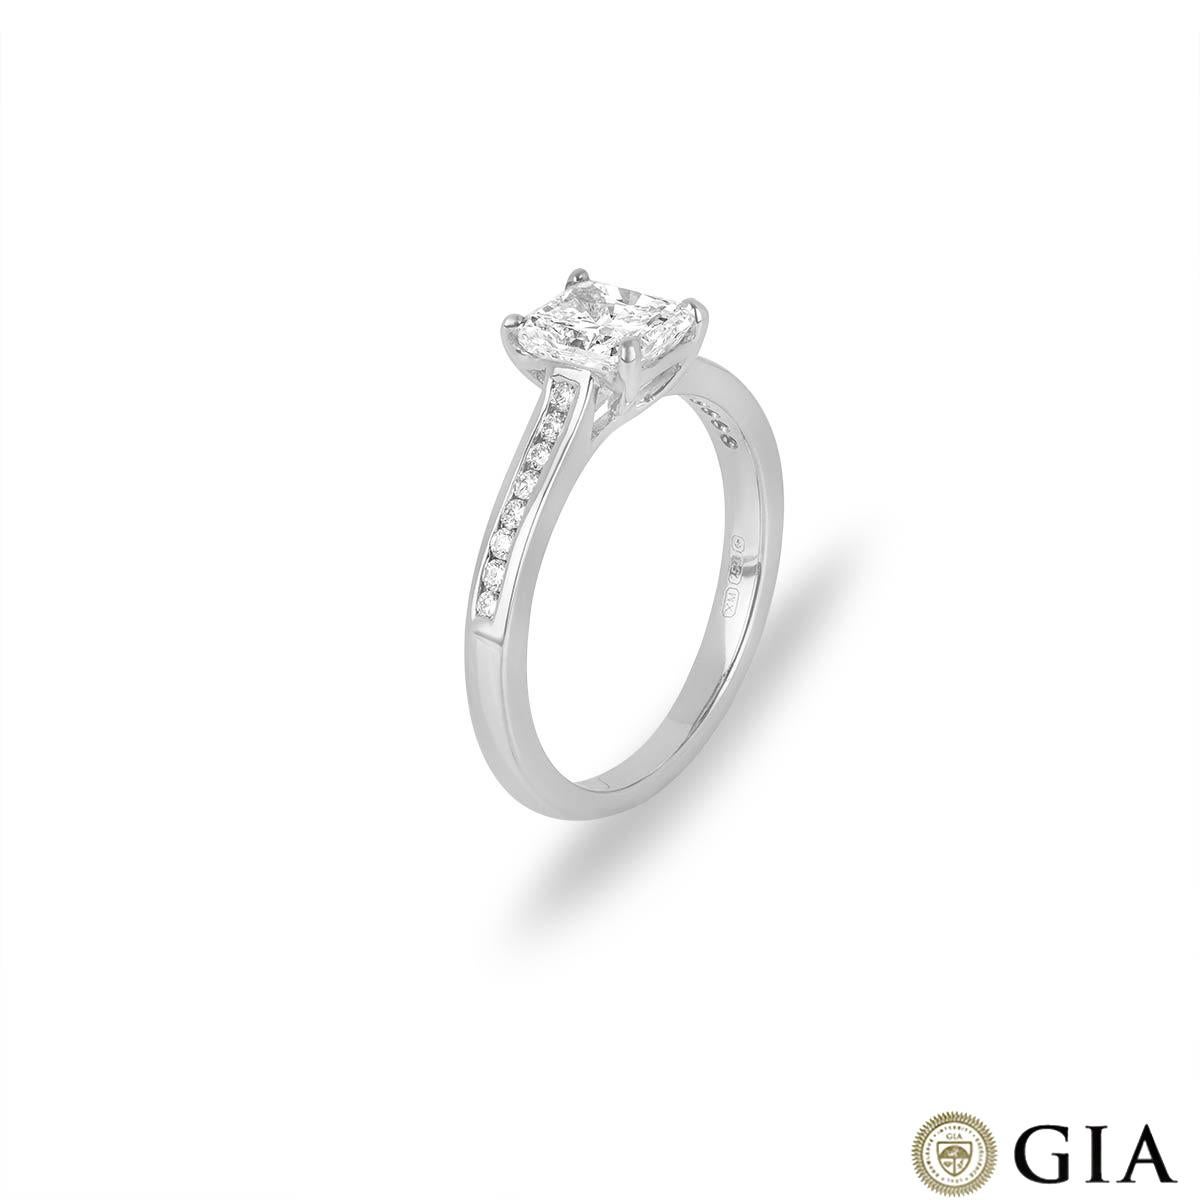 A radiant cut diamond ring set in 18k white gold. The radiant cut diamond weighs 1.01ct, the diamond is H colour and SI1 clarity. The centre stone is set within four claws and has diamond set shoulders.  The 16 round brilliant cut diamond side